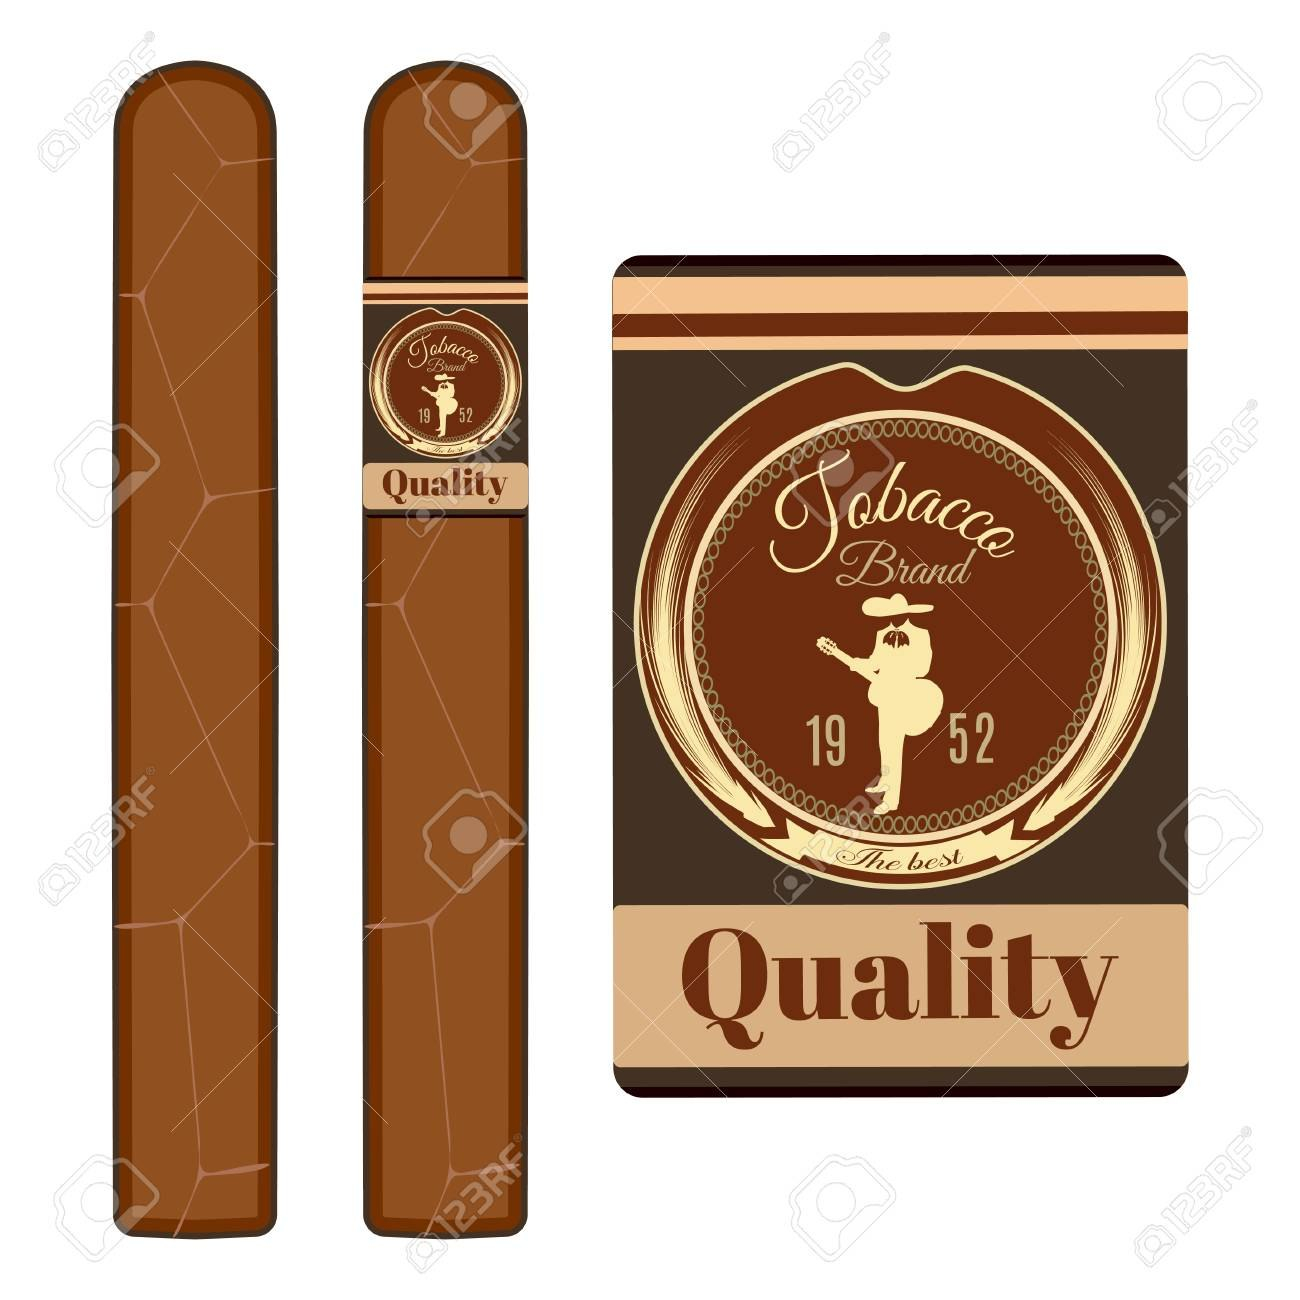 Cigar Label Template Set Vector Flat Illustration Royalty Free pertaining to Cigar Label Template